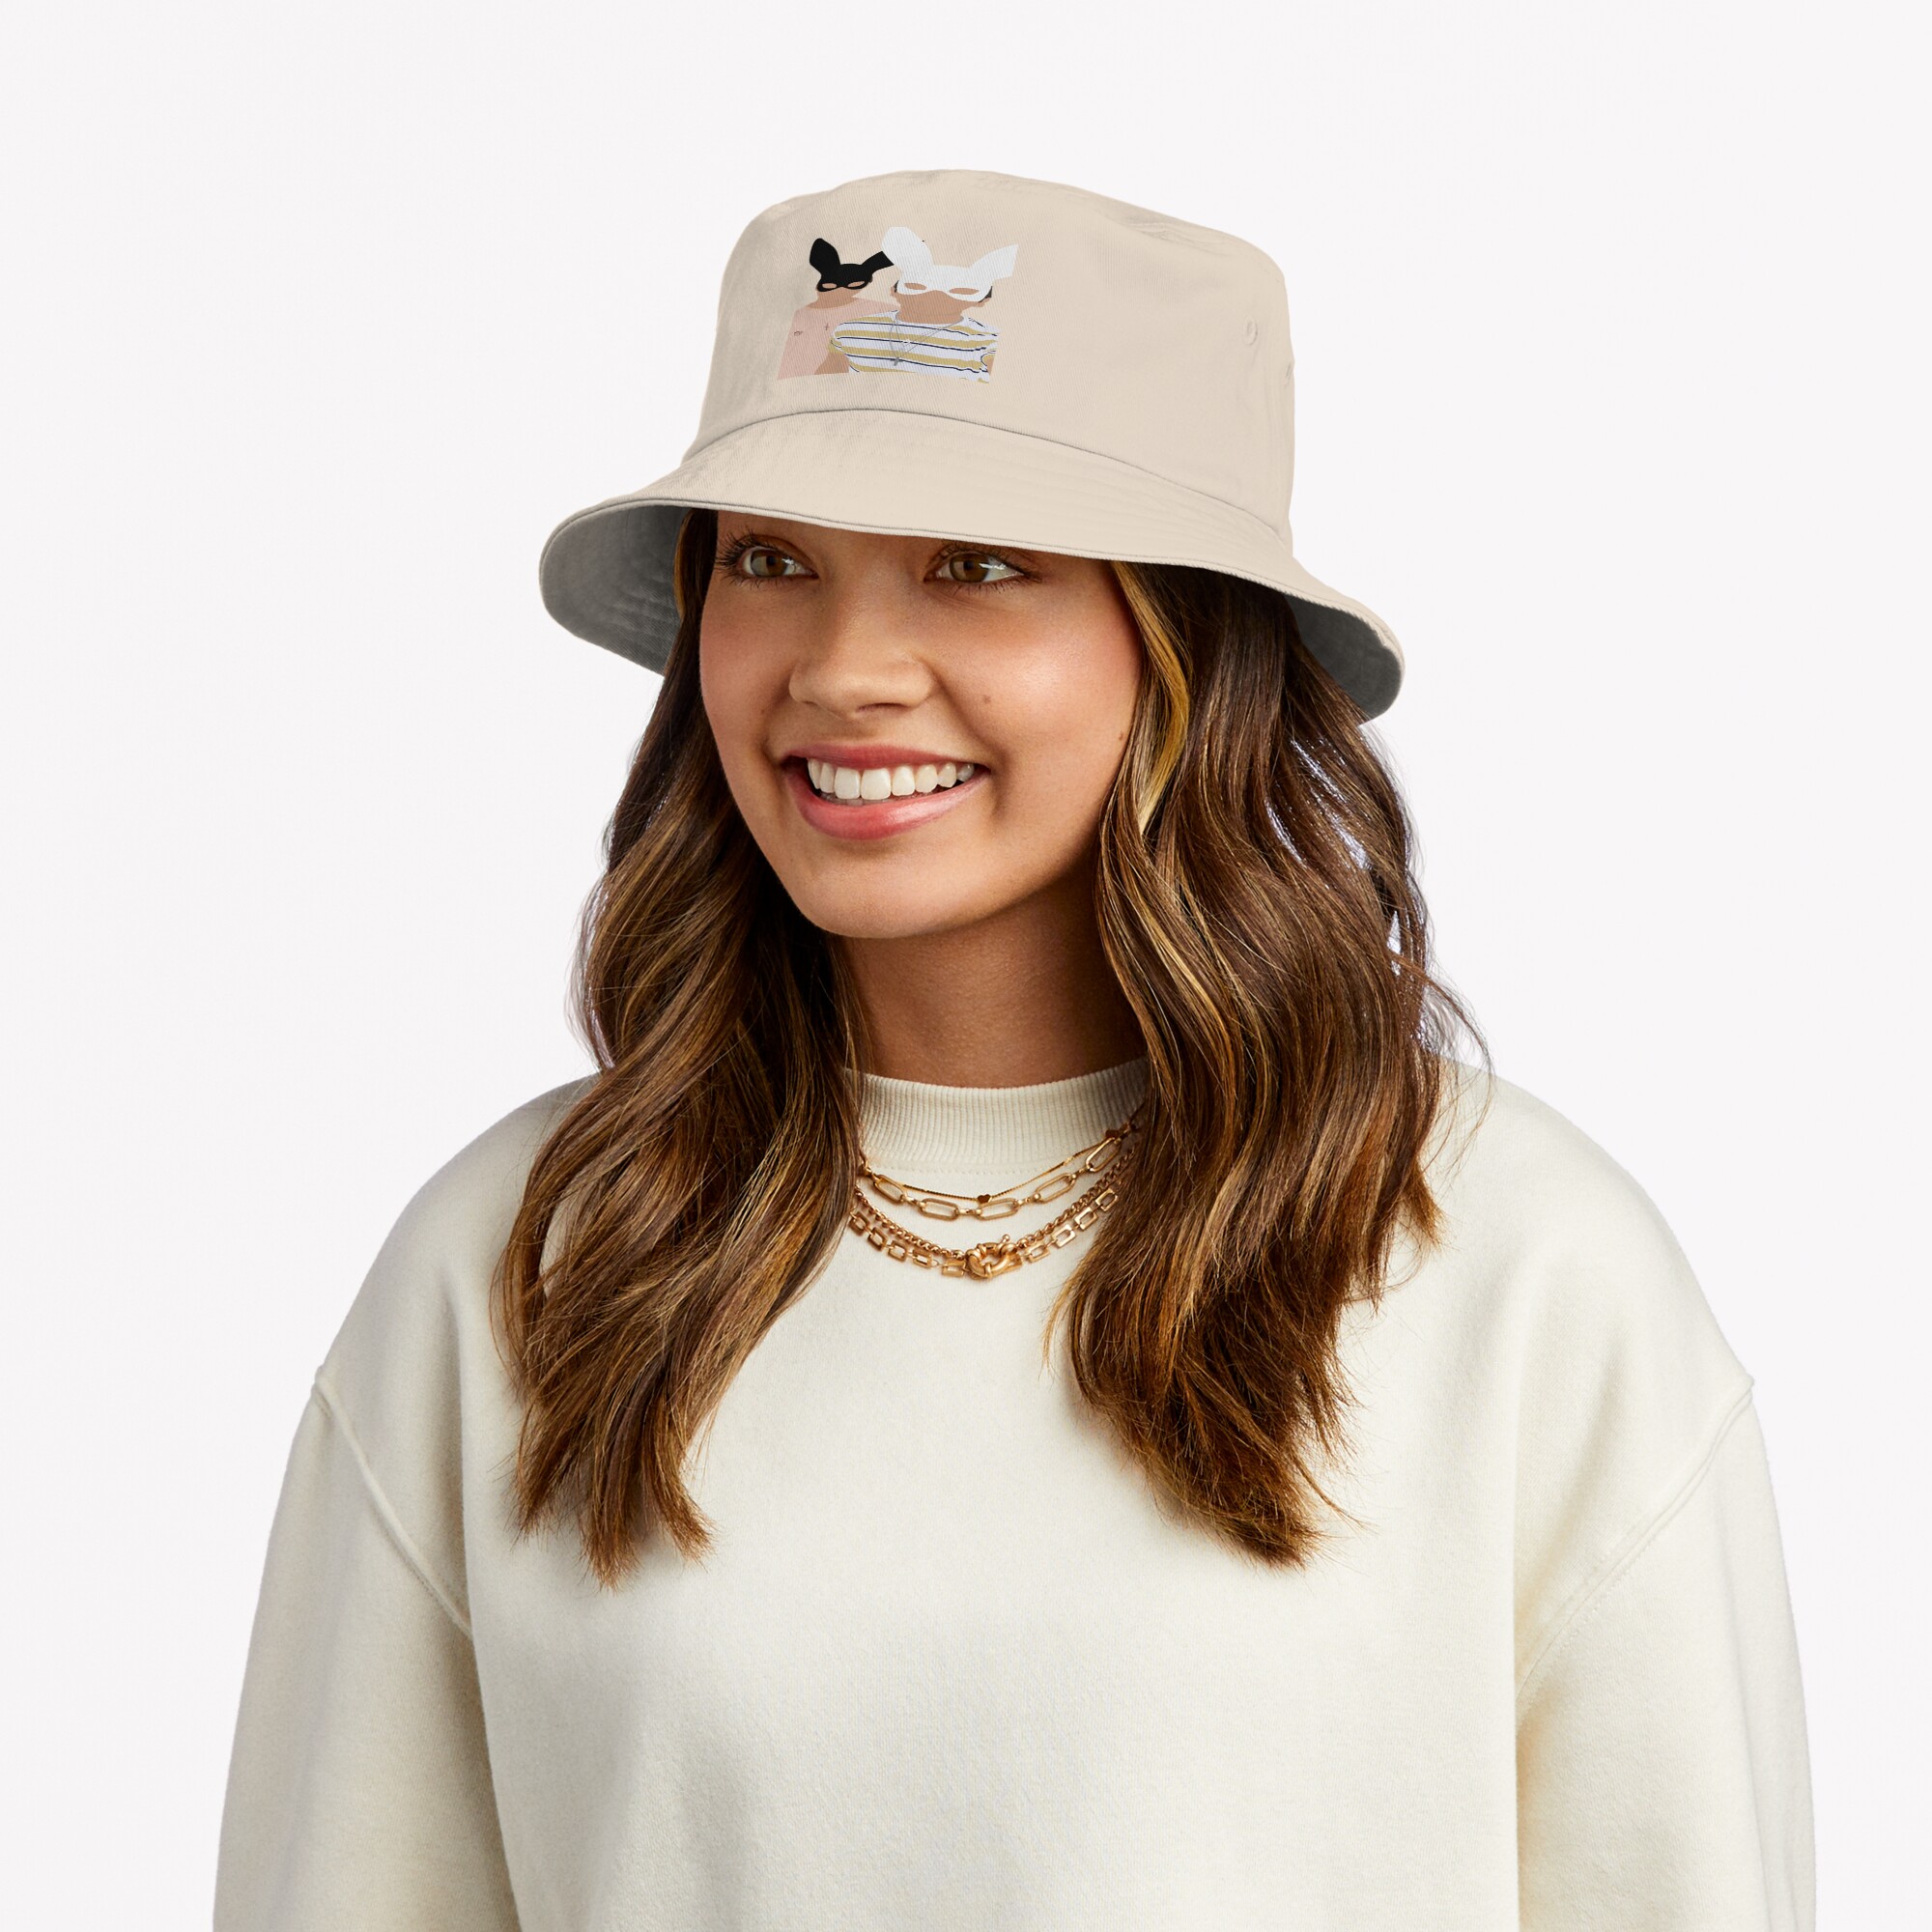 ssrcobucket hatwomense5d6c5f62bbf65eefrontsquare2000x2000 bgf8f8f8 3 - Sam And Colby Shop